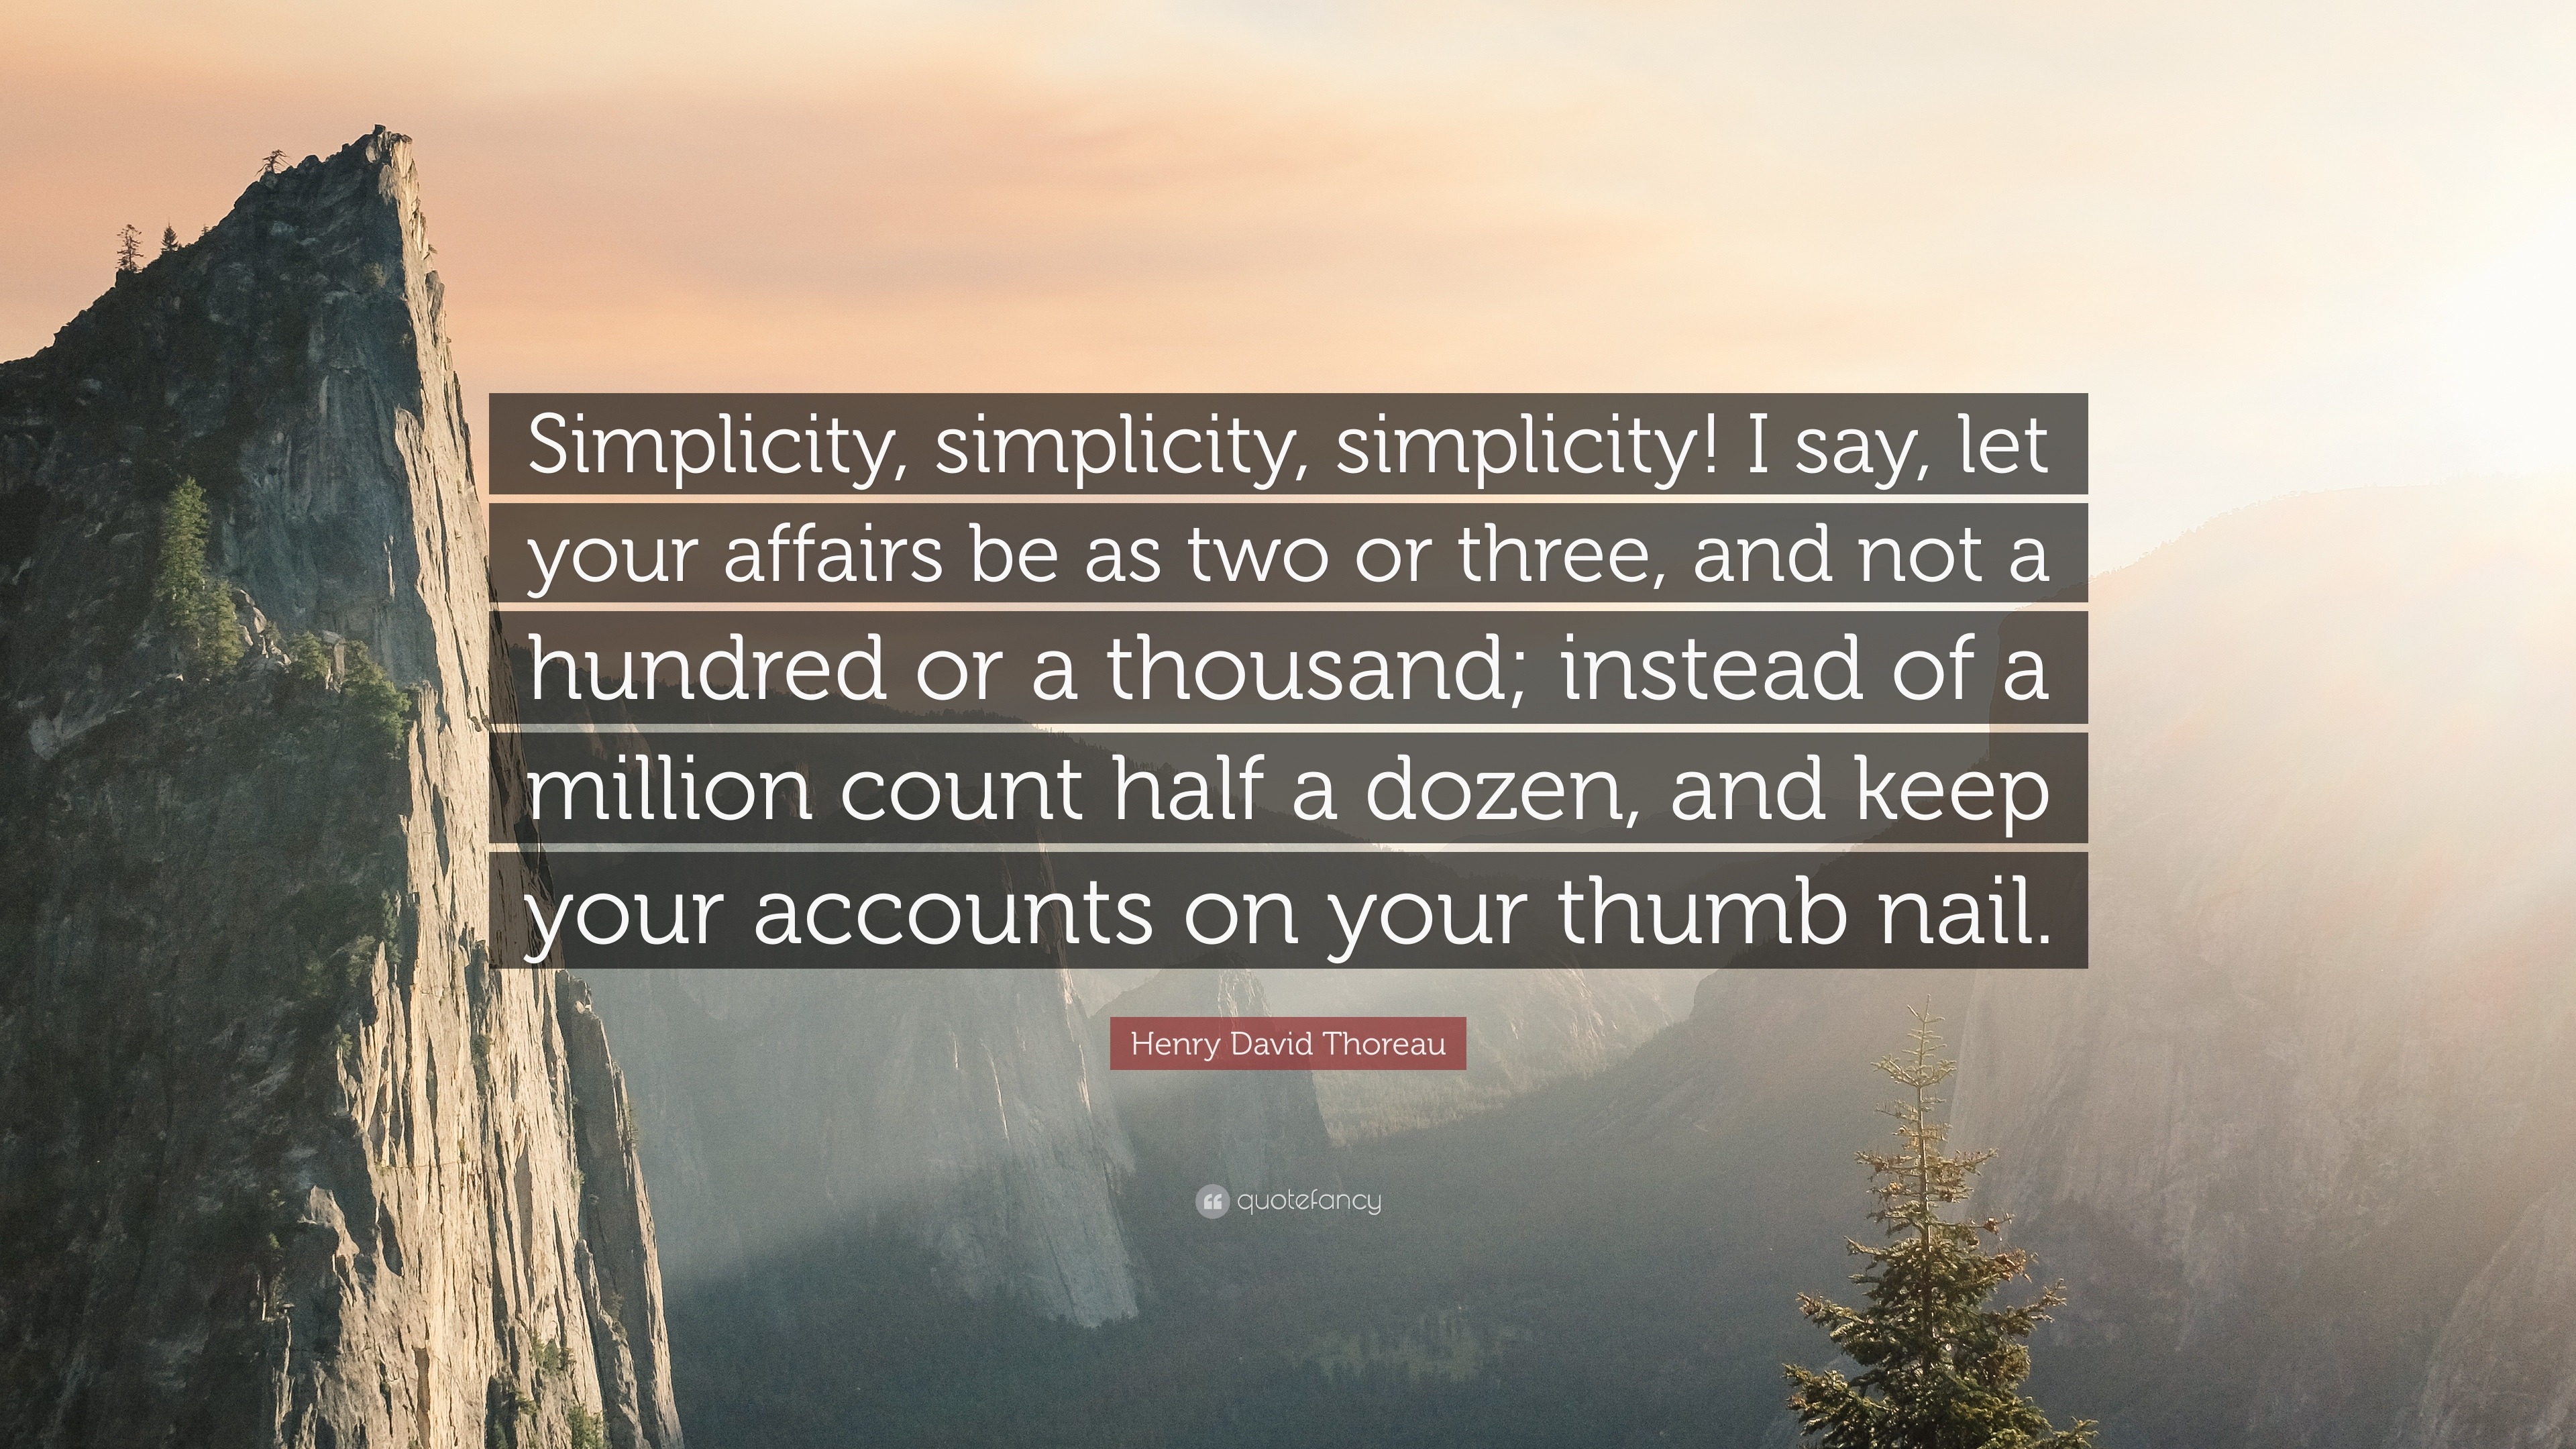 Henry David Thoreau Quote “simplicity Simplicity Simplicity I Say Let Your Affairs Be As